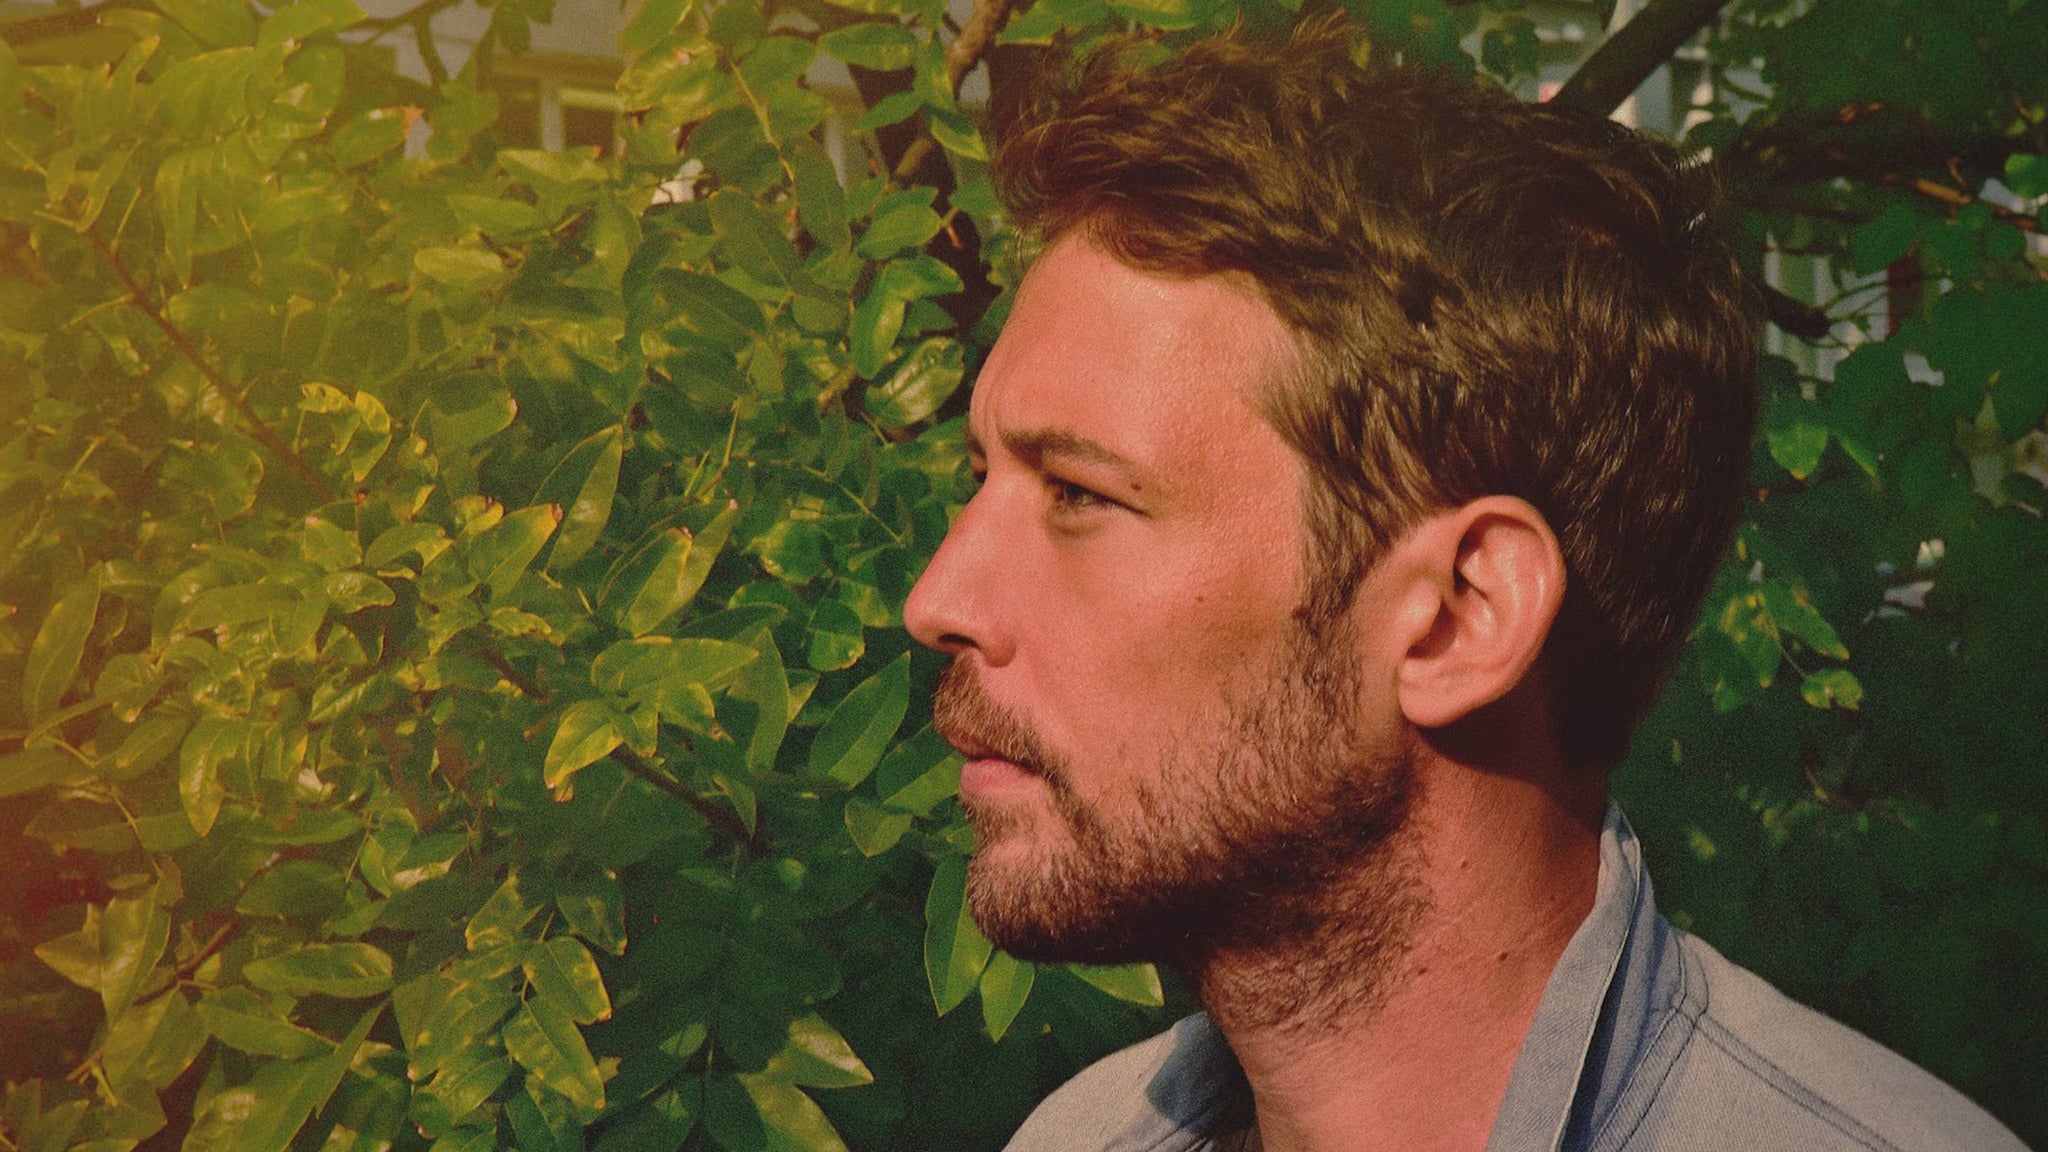 WXPN Welcomes Fleet Foxes: Shore Tour presale code for show tickets in Philadelphia, PA (TD Pavilion at the Mann)